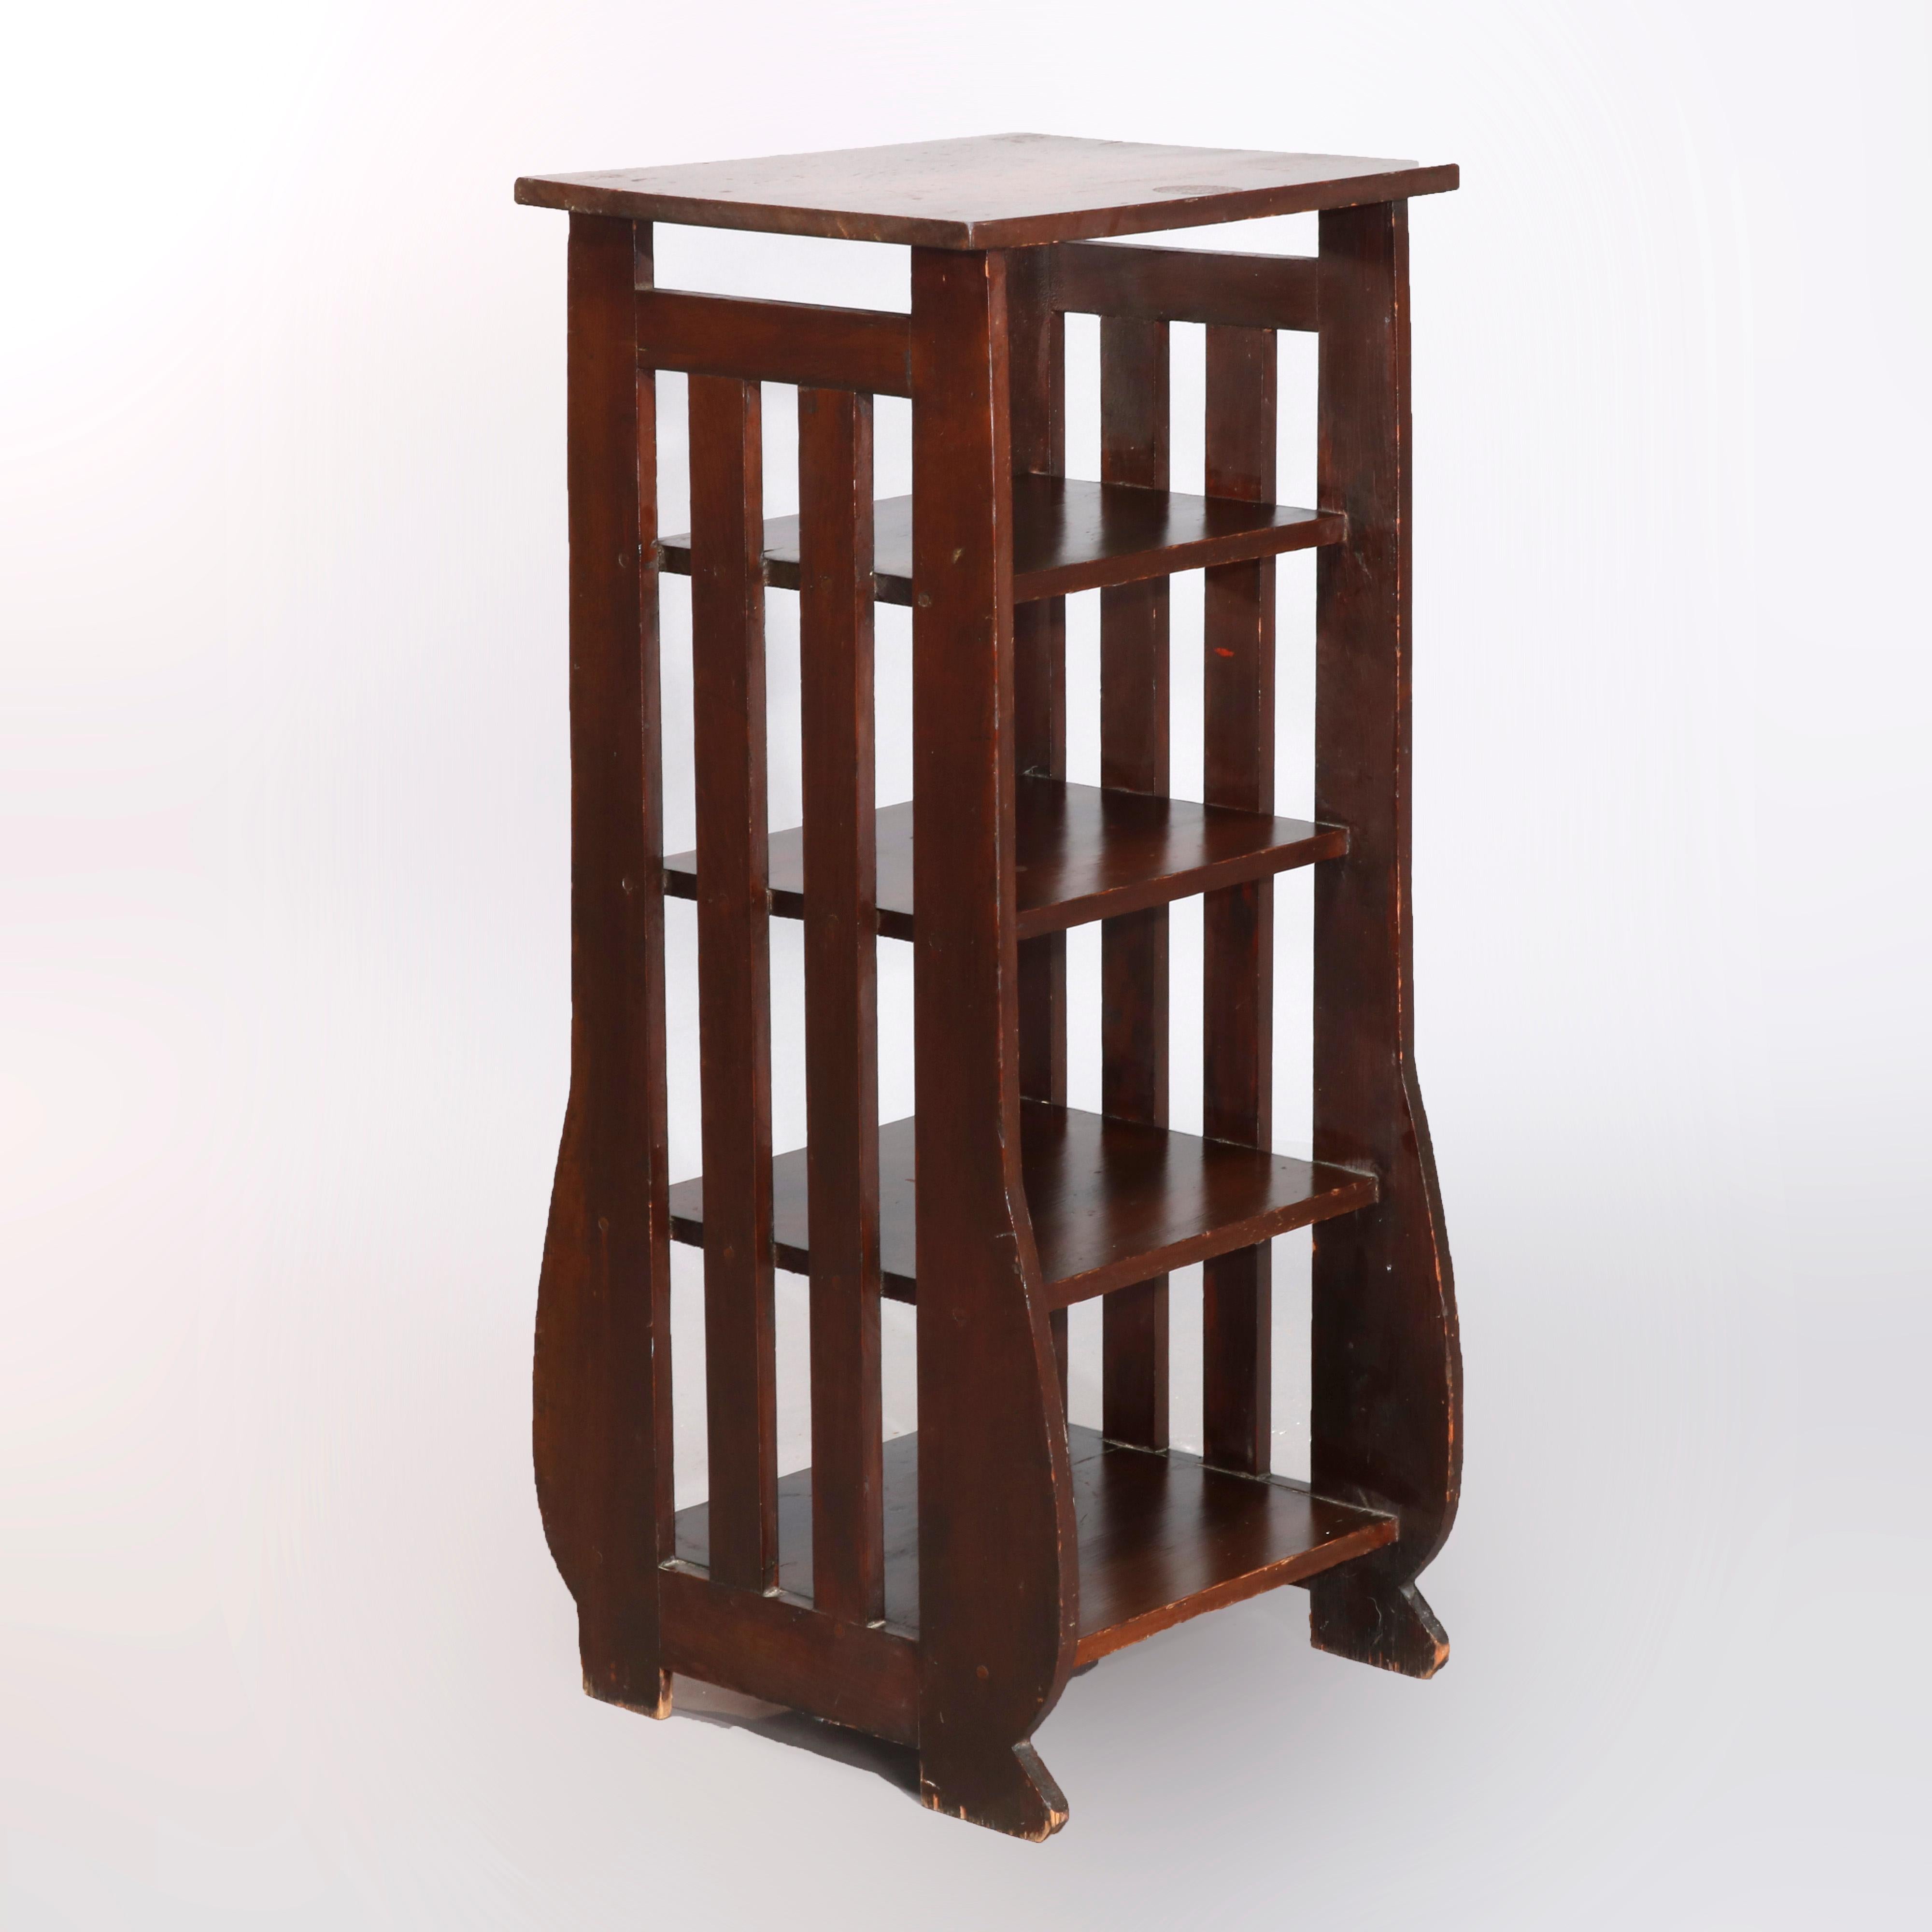 An antique Arts & Crafts magazine stand offers oak slat construction with lyre shaped sides and four shelves, circa 1920

Measures: 42.5